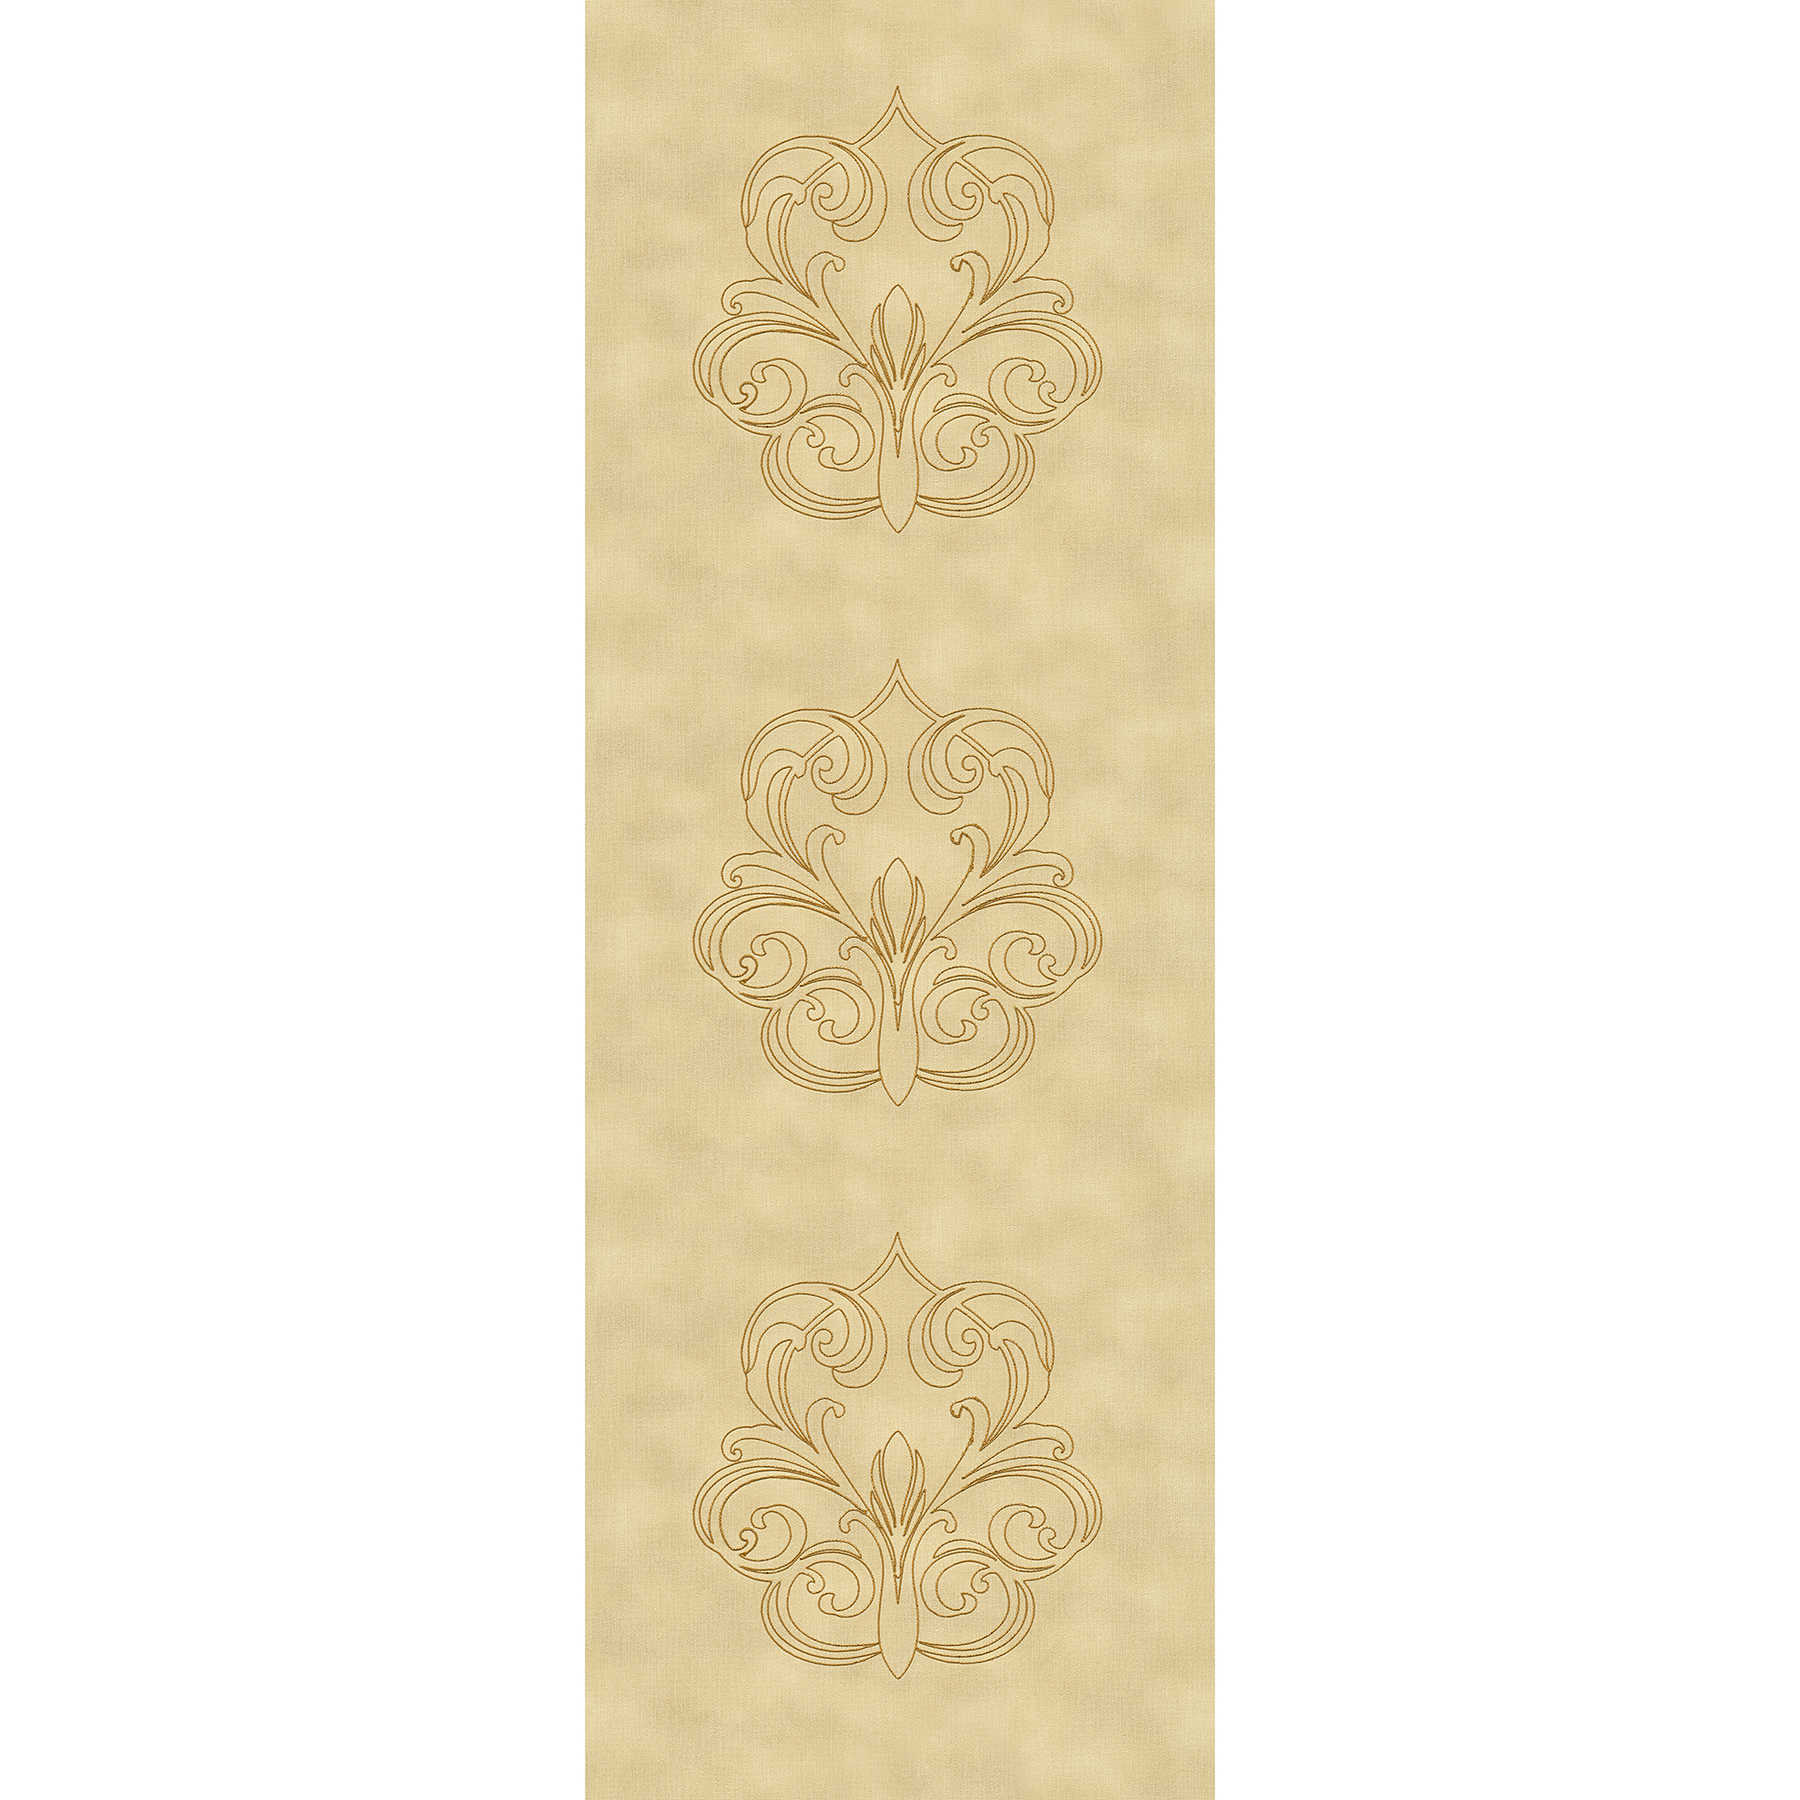         Premium wall panel with ornaments on textile structure - yellow, gold
    